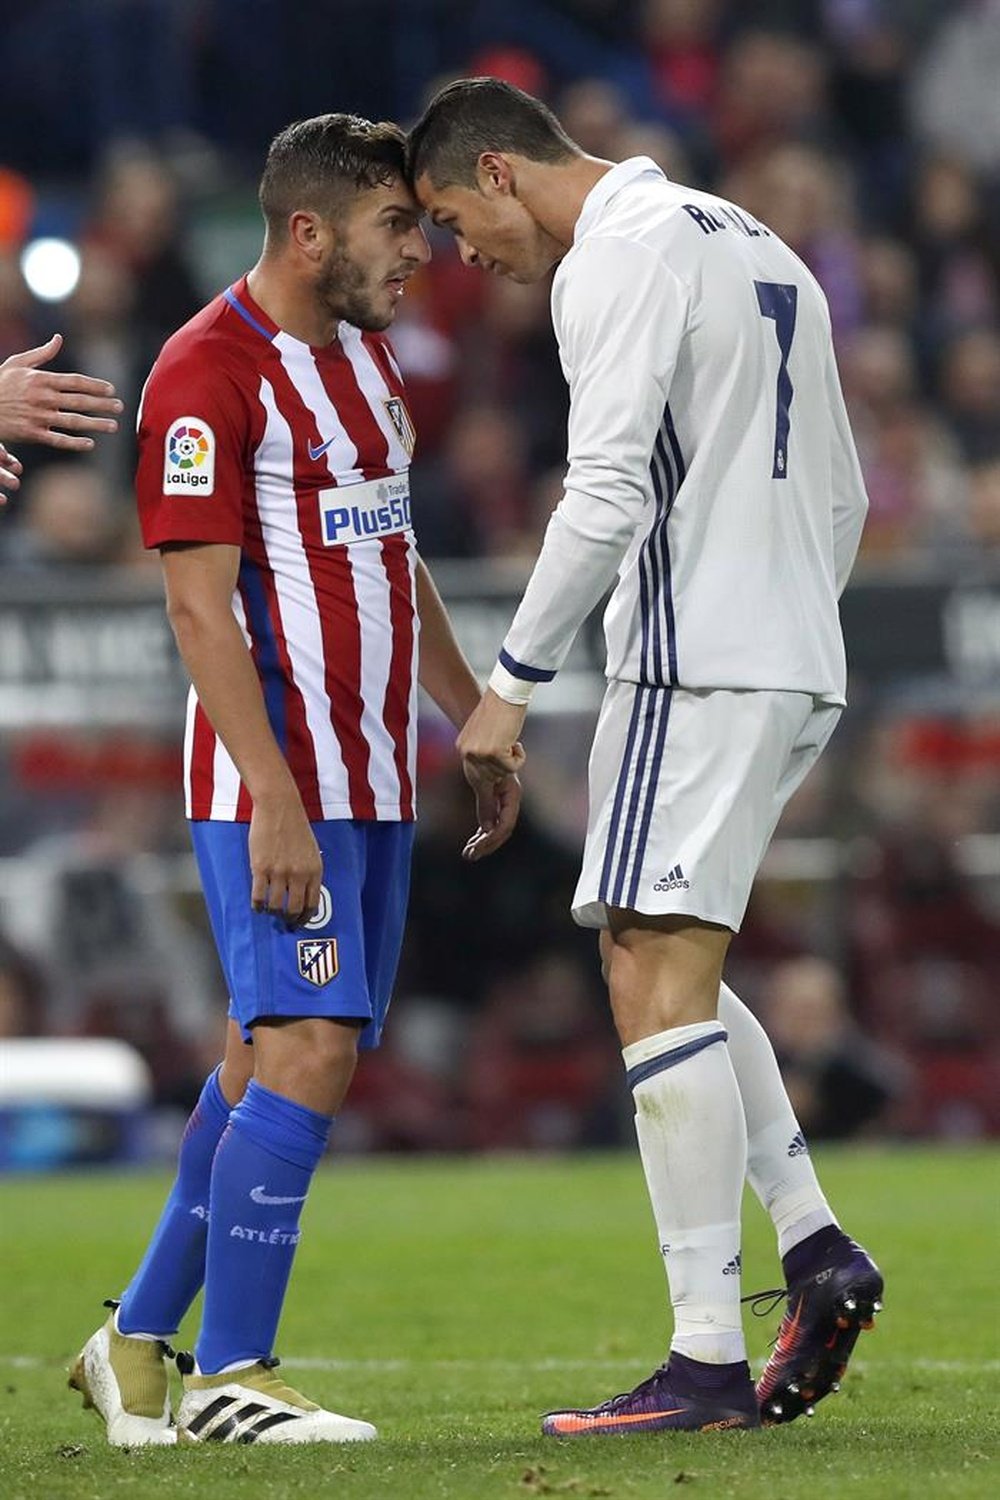 Koke (L) and Ronaldo square up during the Madrid derby. EFE